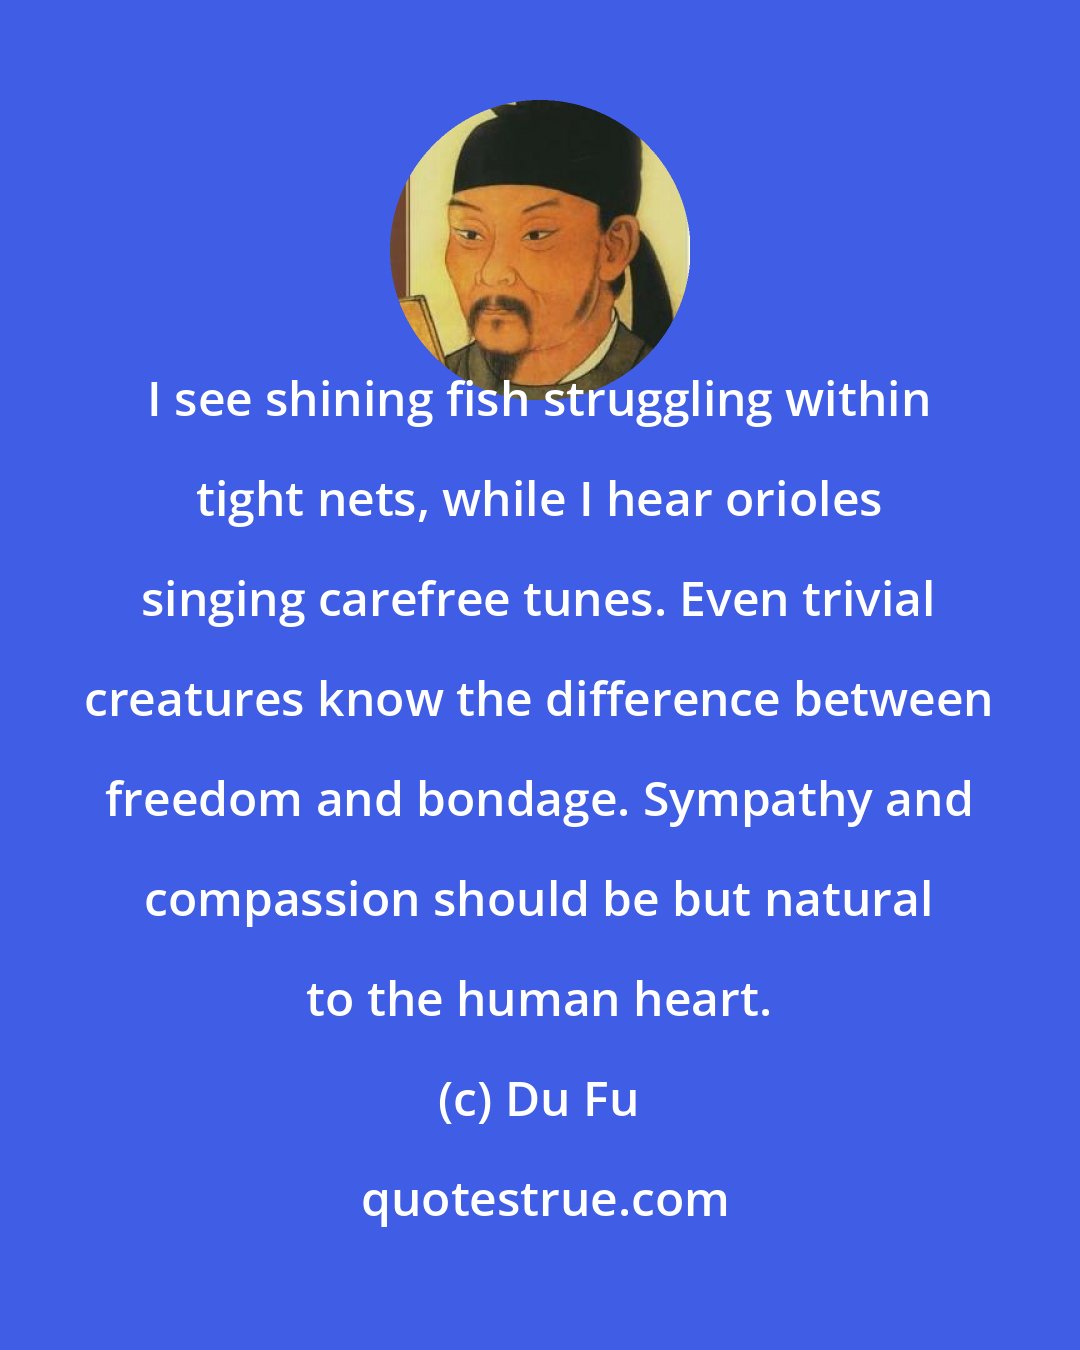 Du Fu: I see shining fish struggling within tight nets, while I hear orioles singing carefree tunes. Even trivial creatures know the difference between freedom and bondage. Sympathy and compassion should be but natural to the human heart.